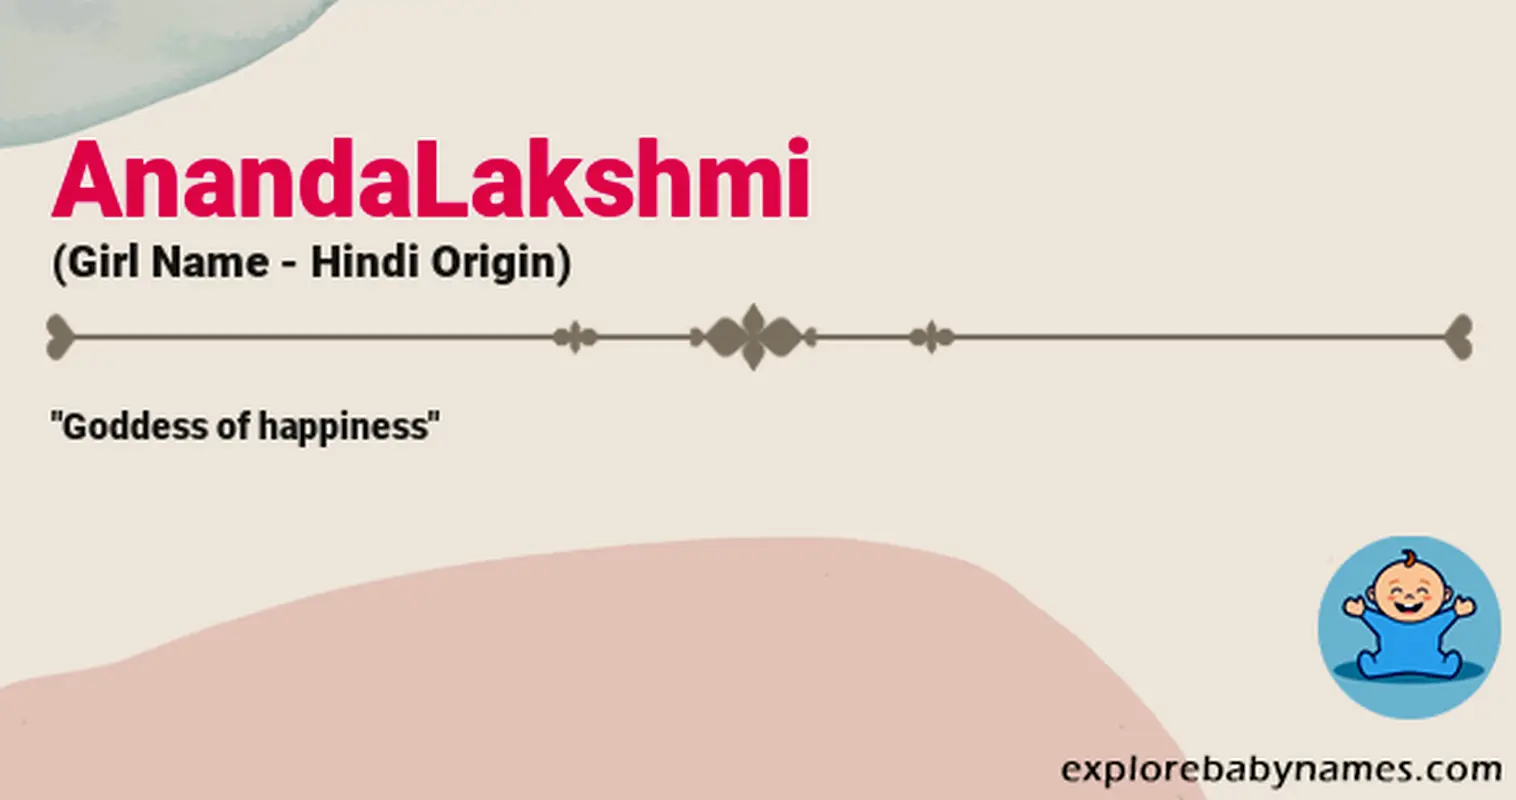 Meaning of AnandaLakshmi